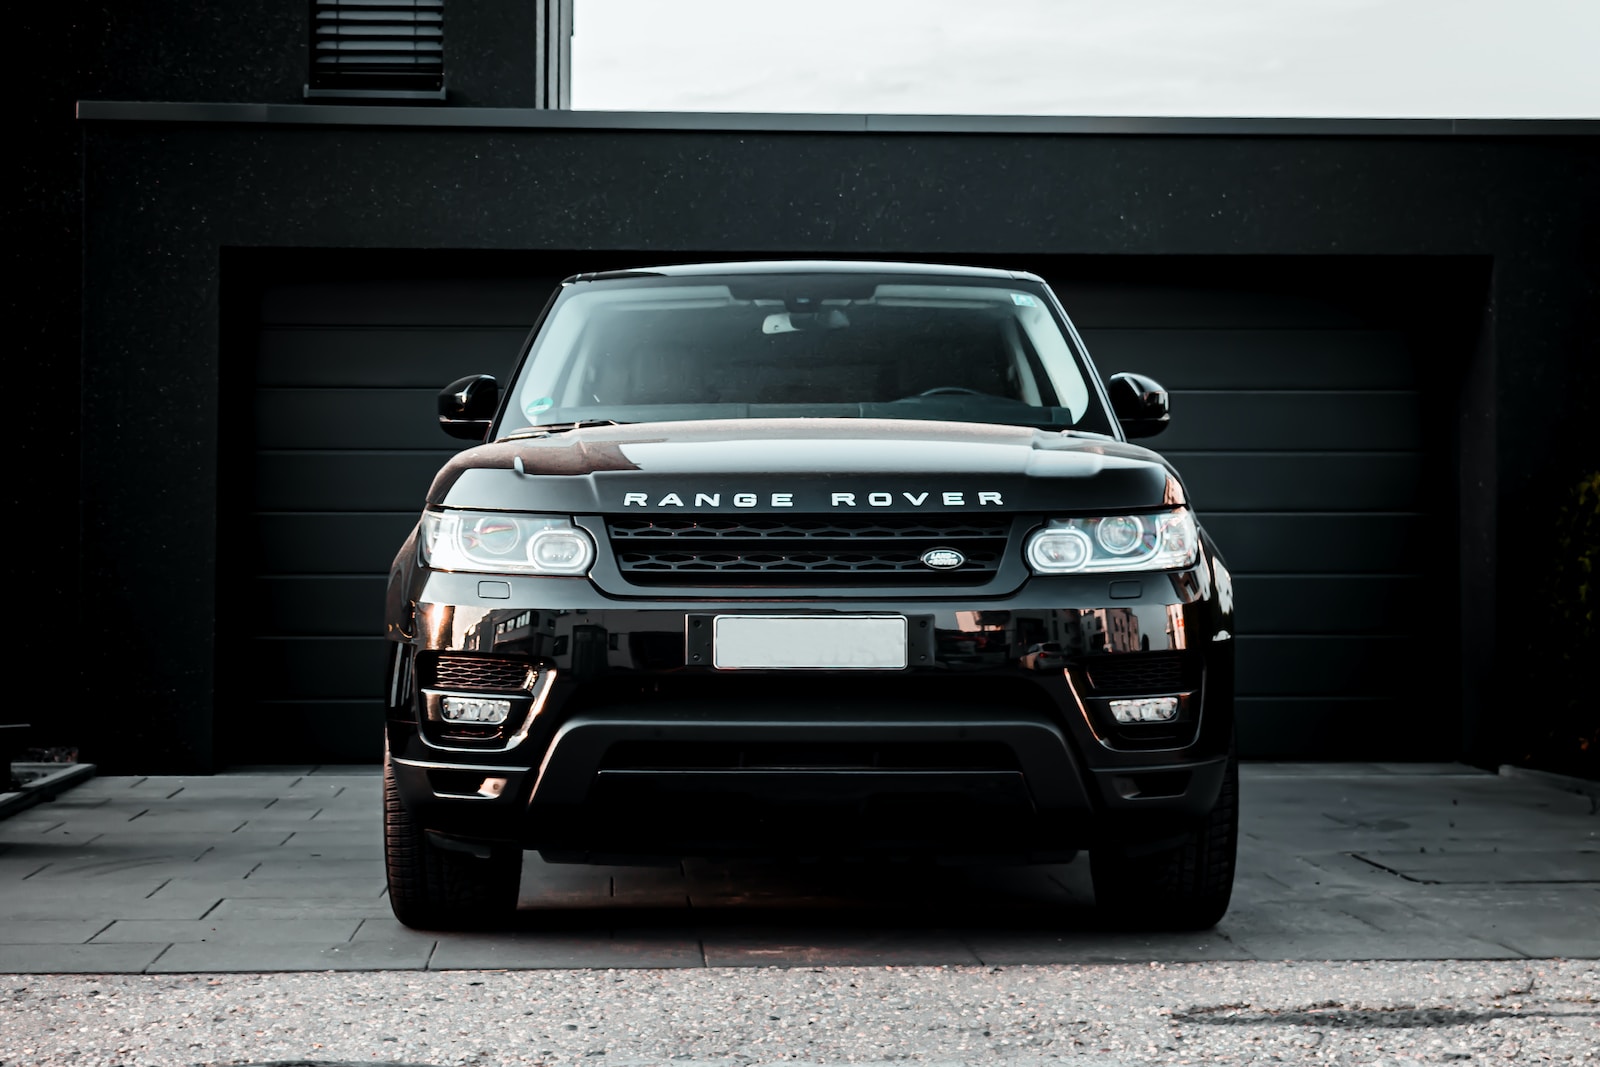 JLR re-launches insurance offer following increased Range Rover thefts